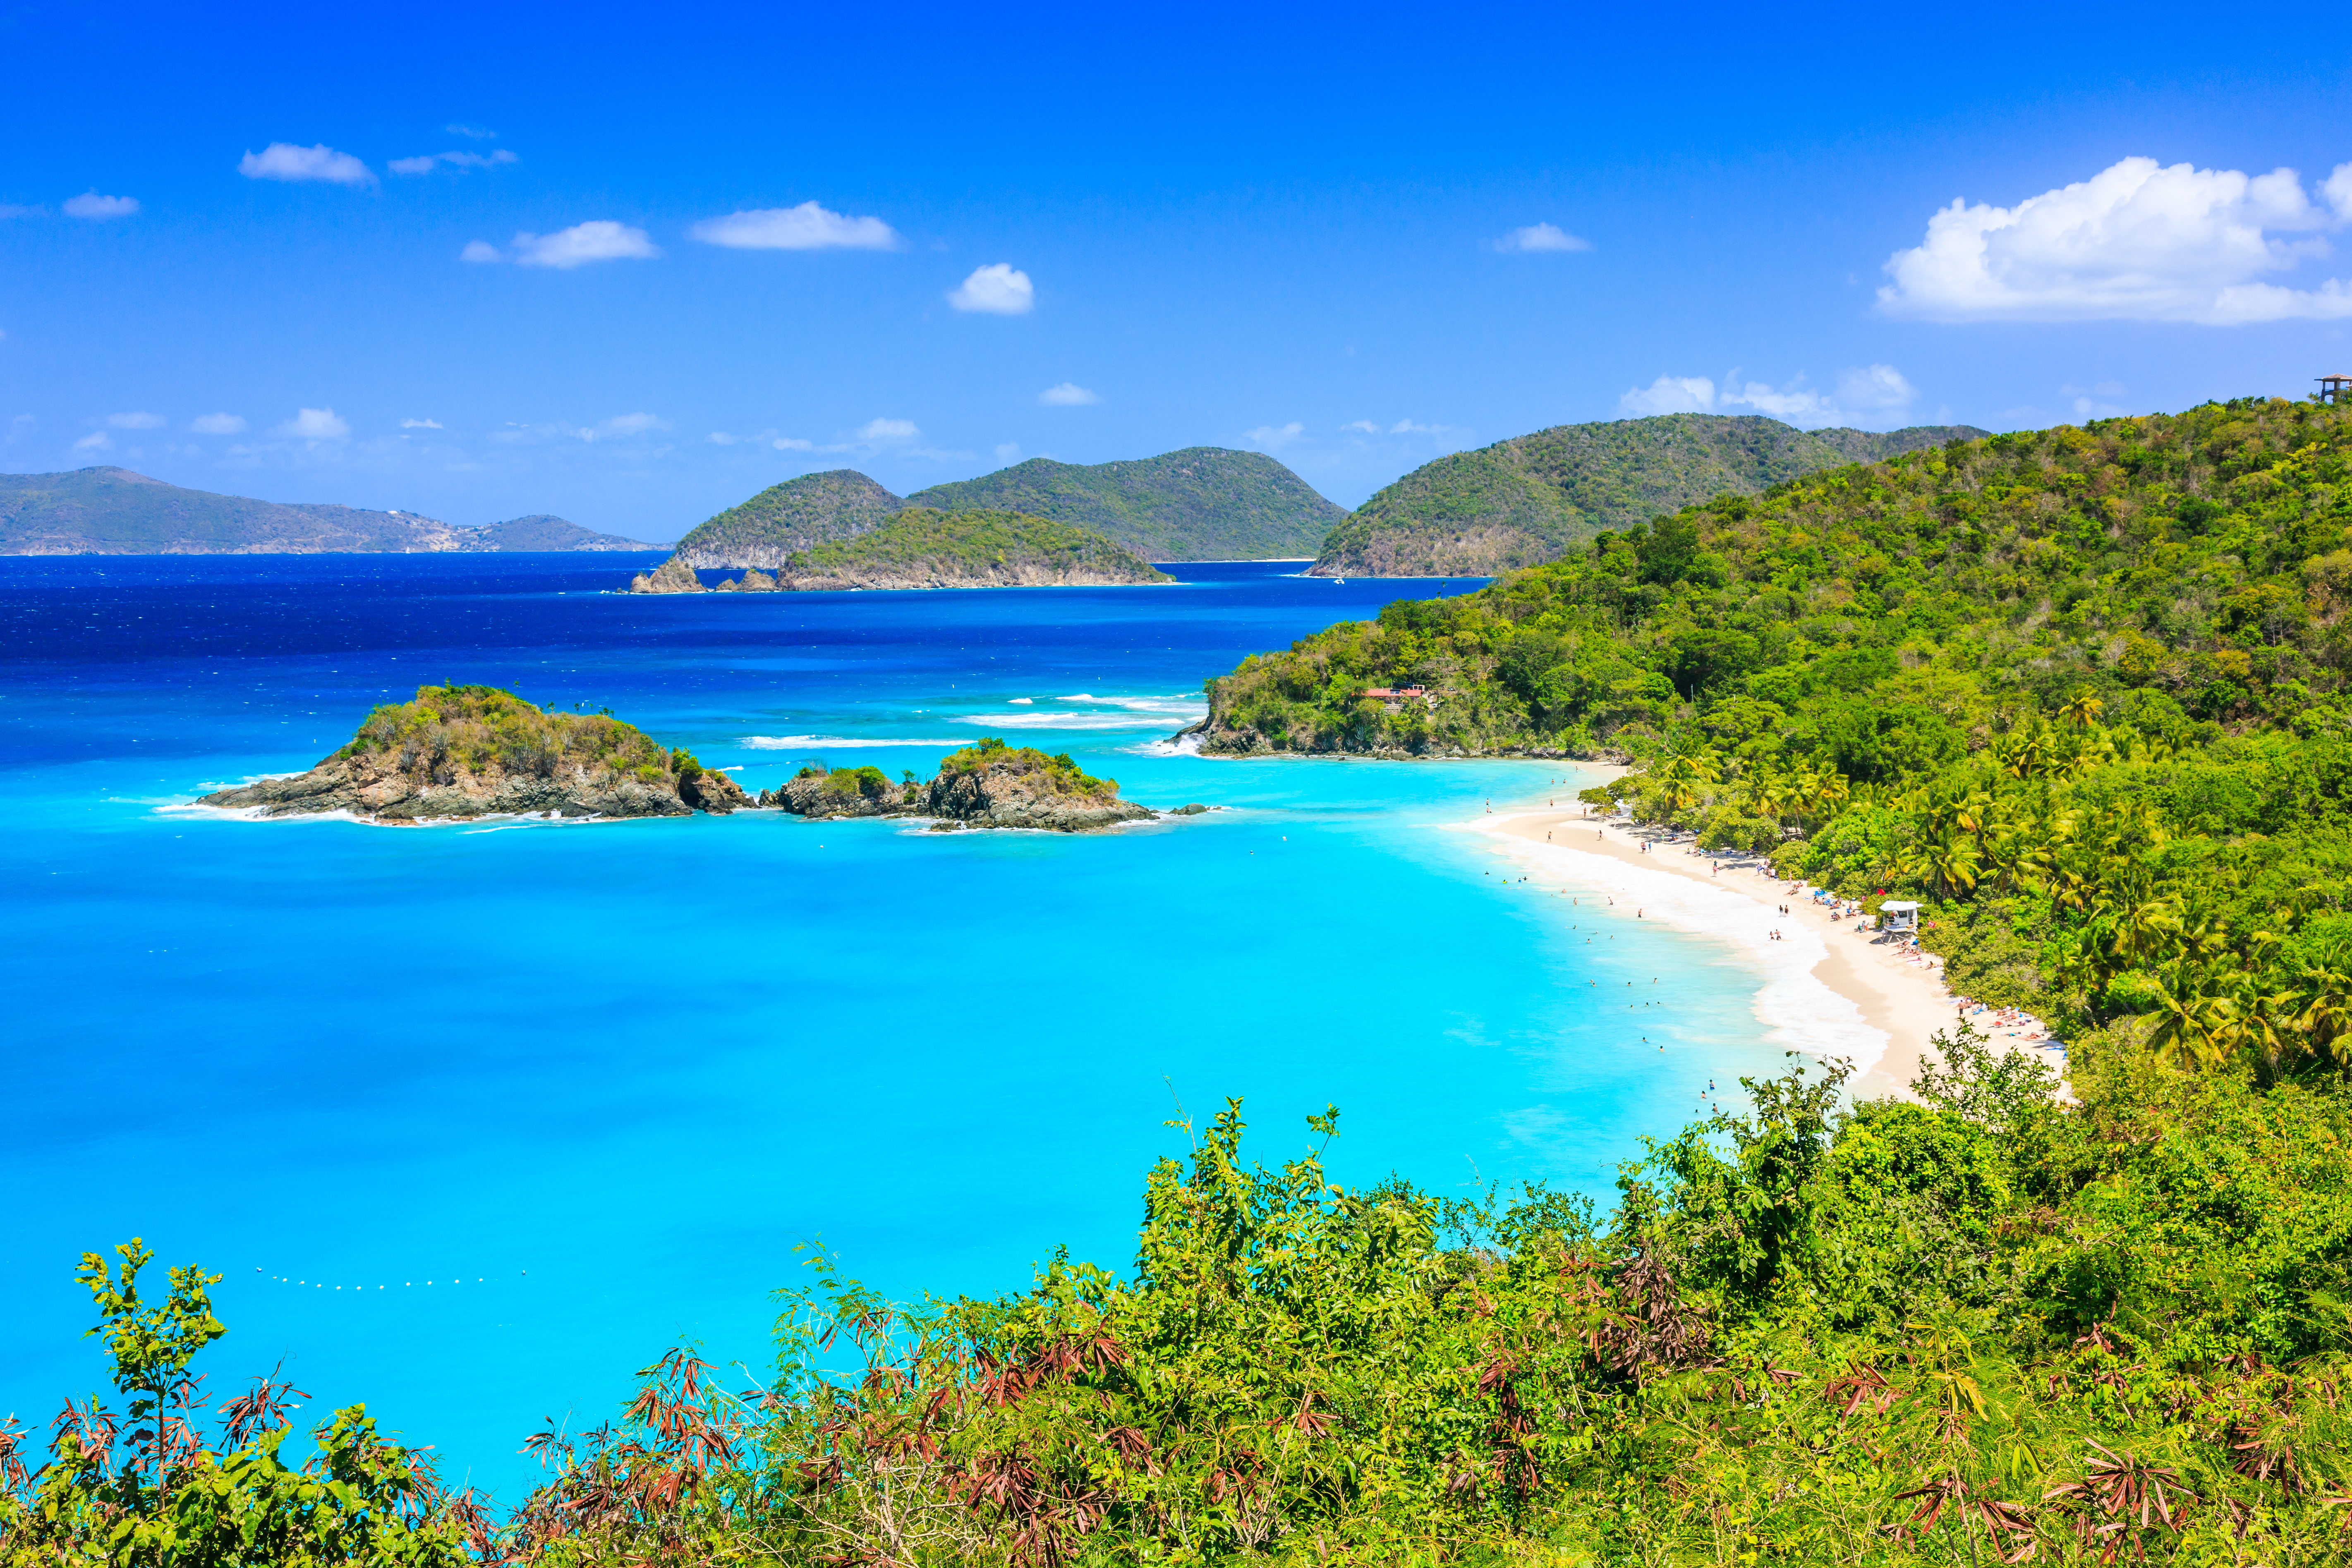 Panorama view of tropical Caribbean islands, green trees, white sand shores and turquoise waters. 